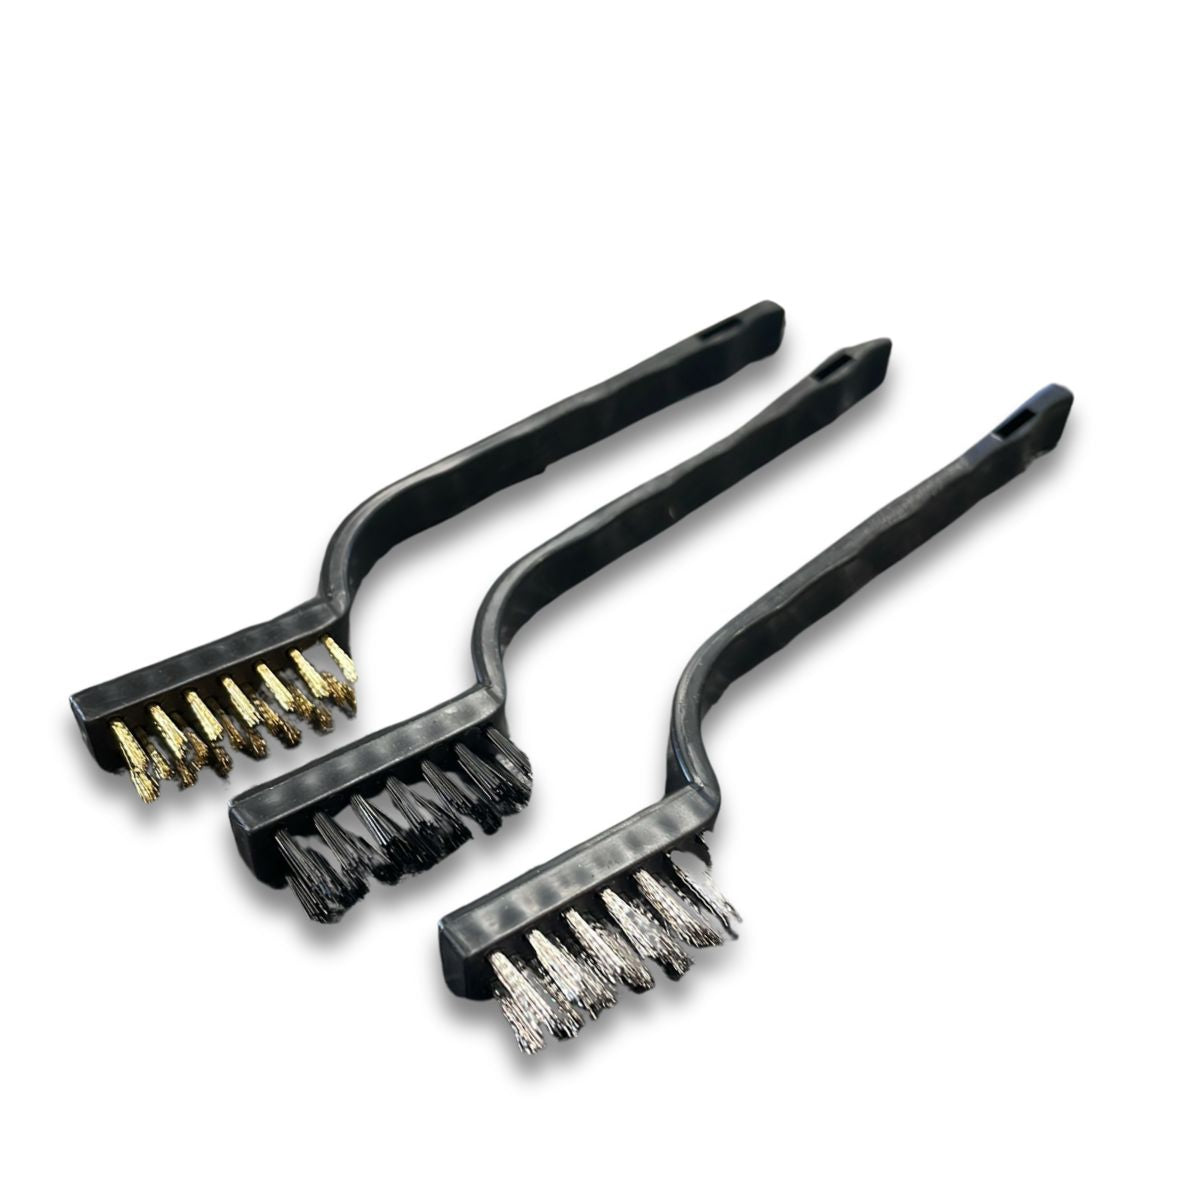 3 piece wire brush set - South East Clearance Centre